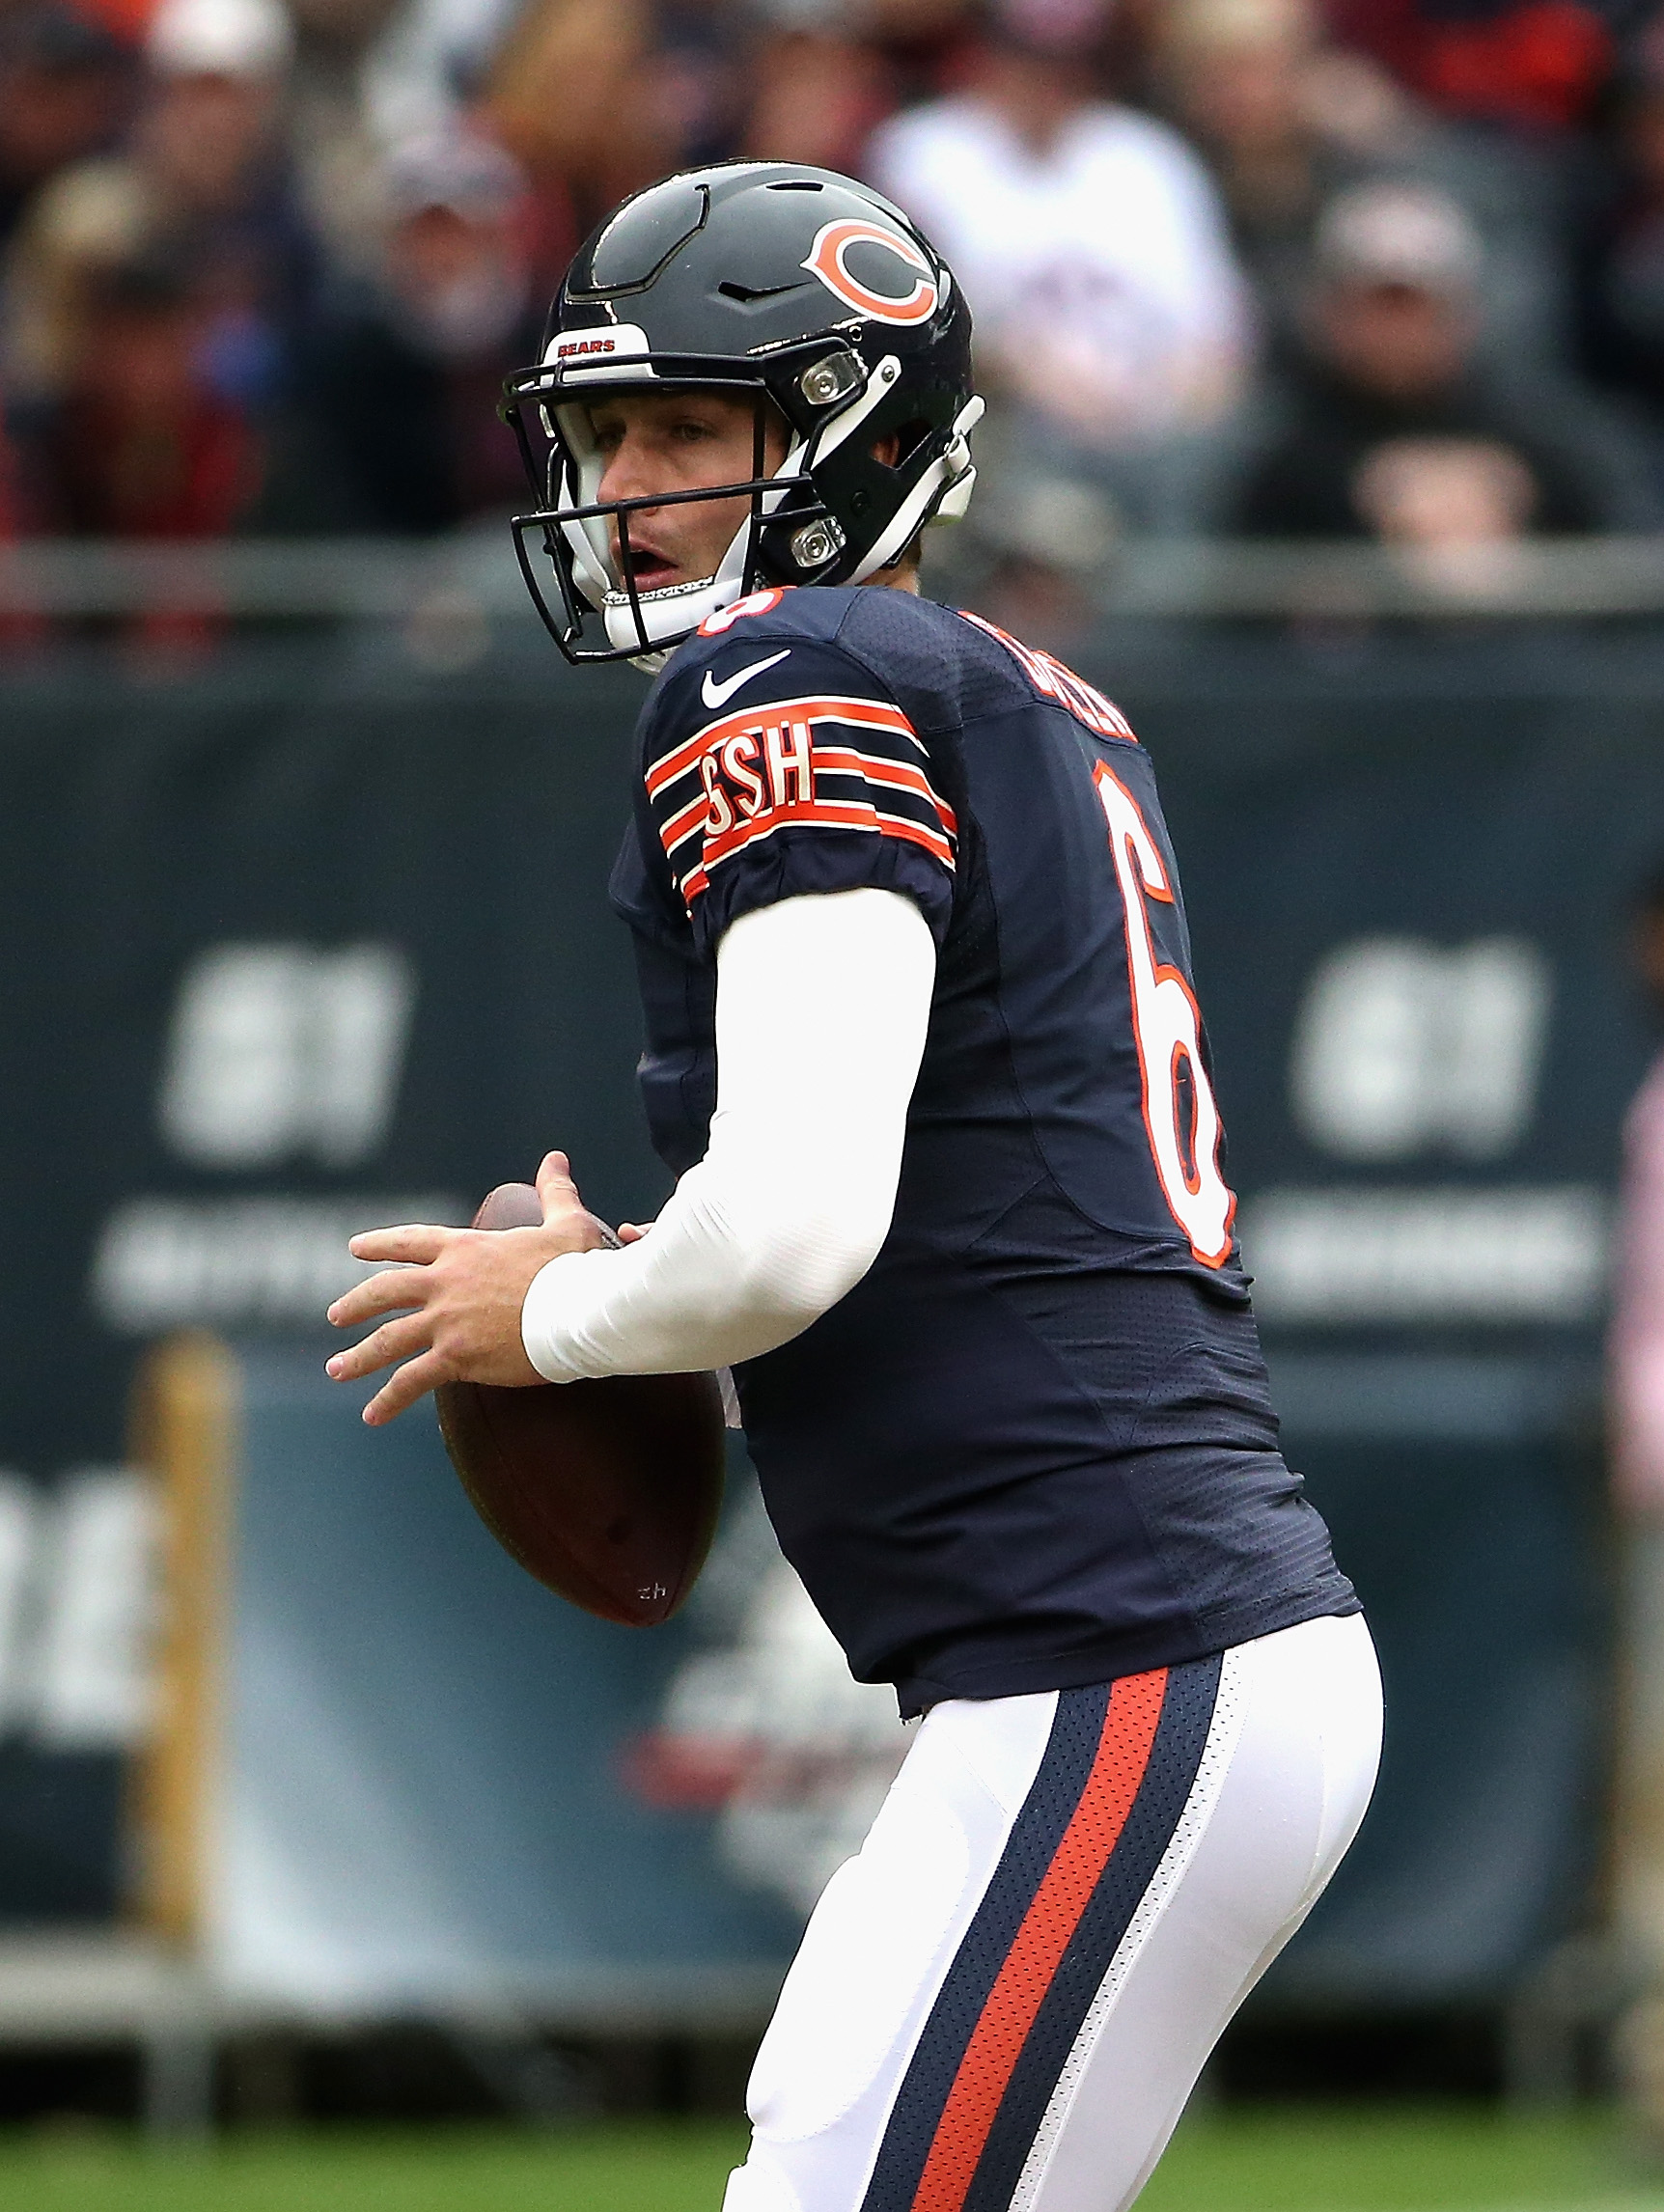 Jay Cutler coughed up the ball early Sunday. (Getty)